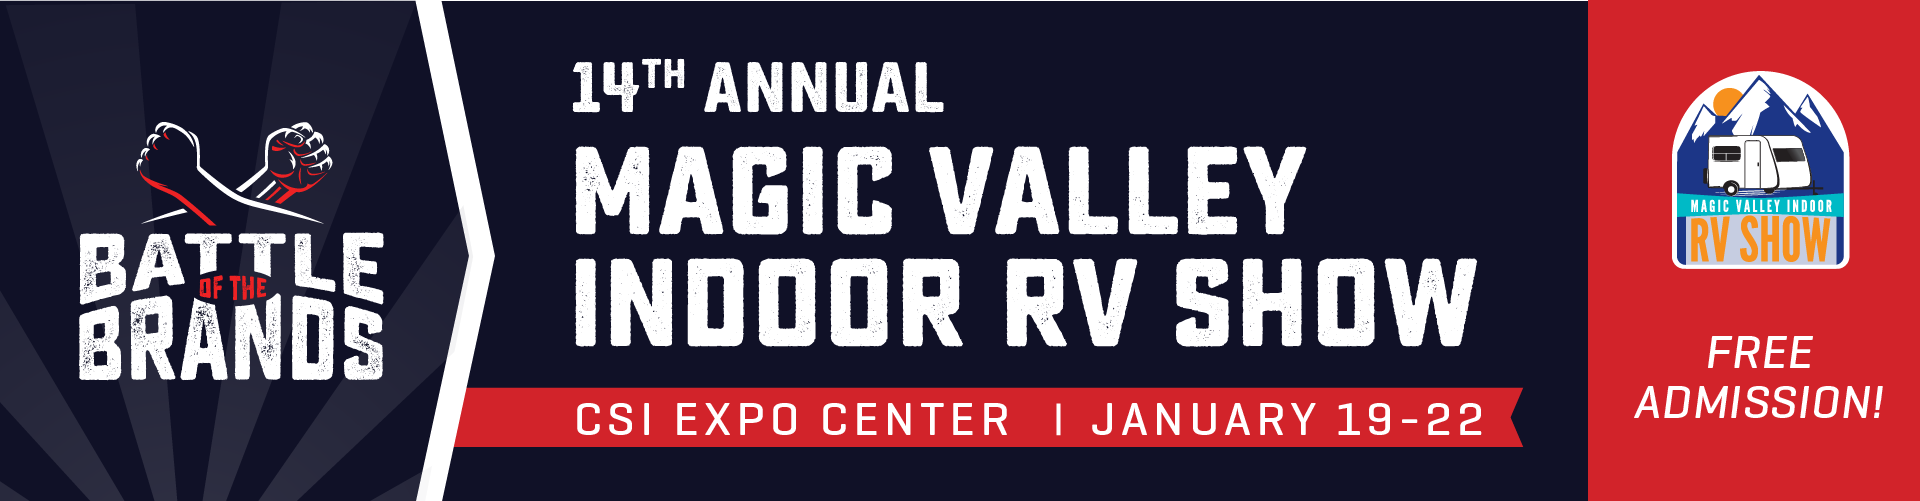 Battle of the brands - 14th Annual Magic Valley Indoor RV Show